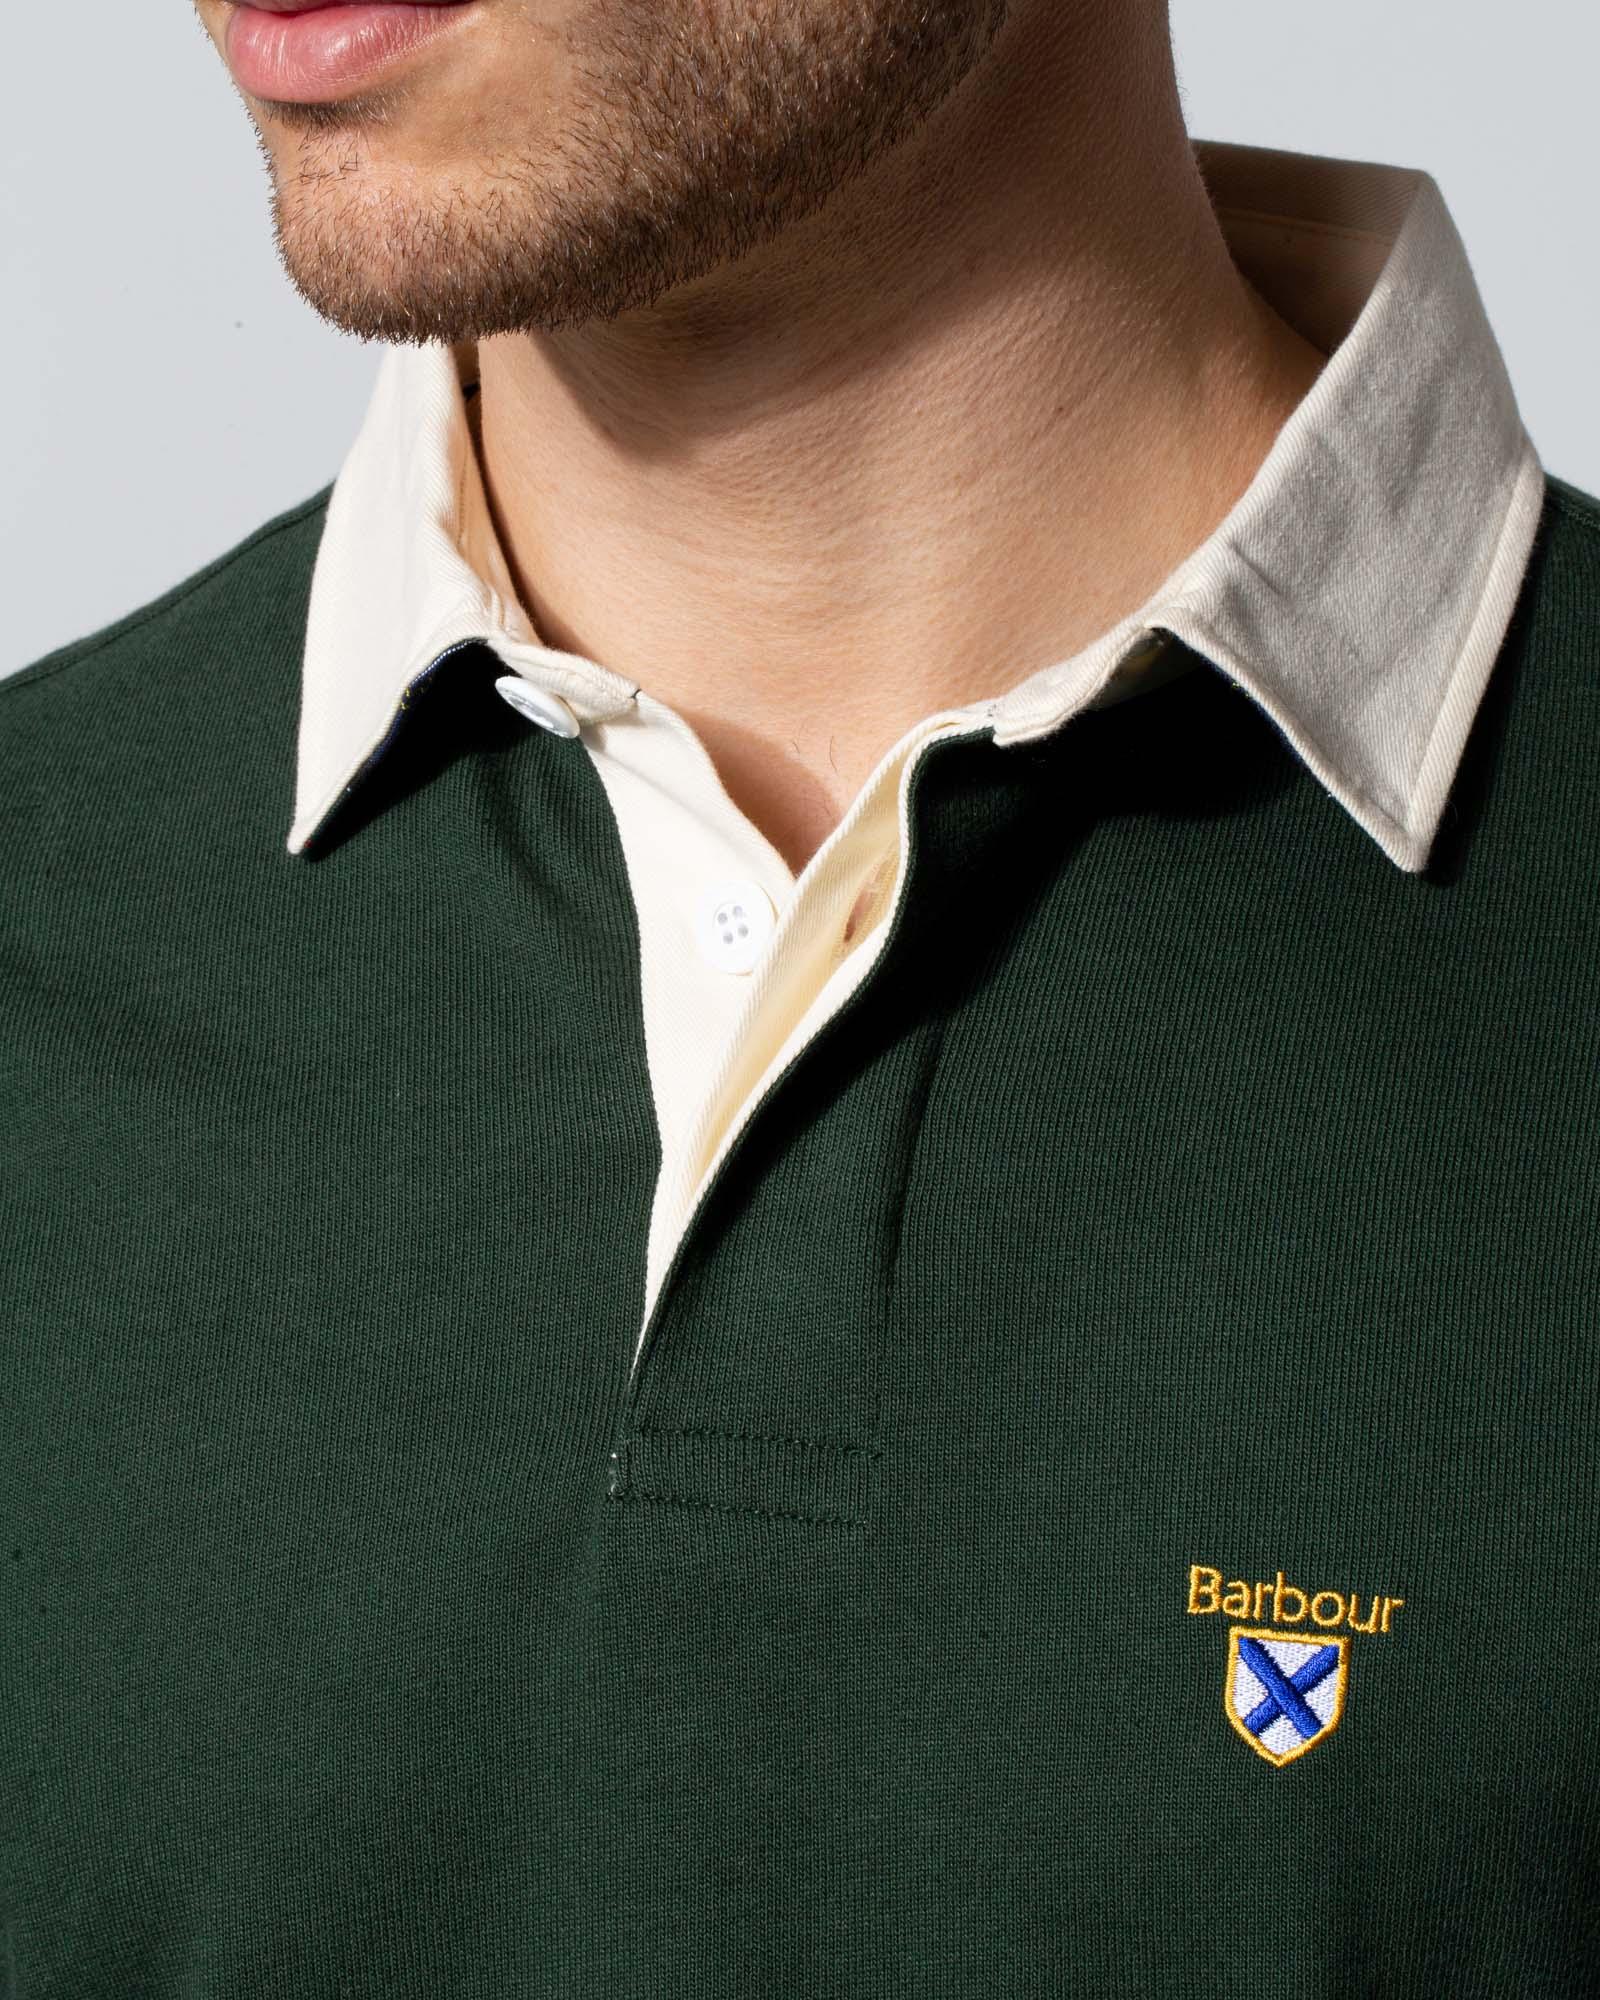 Barbour Polo Rugby Manica Lunga in Blue,Green (Green) for Men - Save 20% |  Lyst